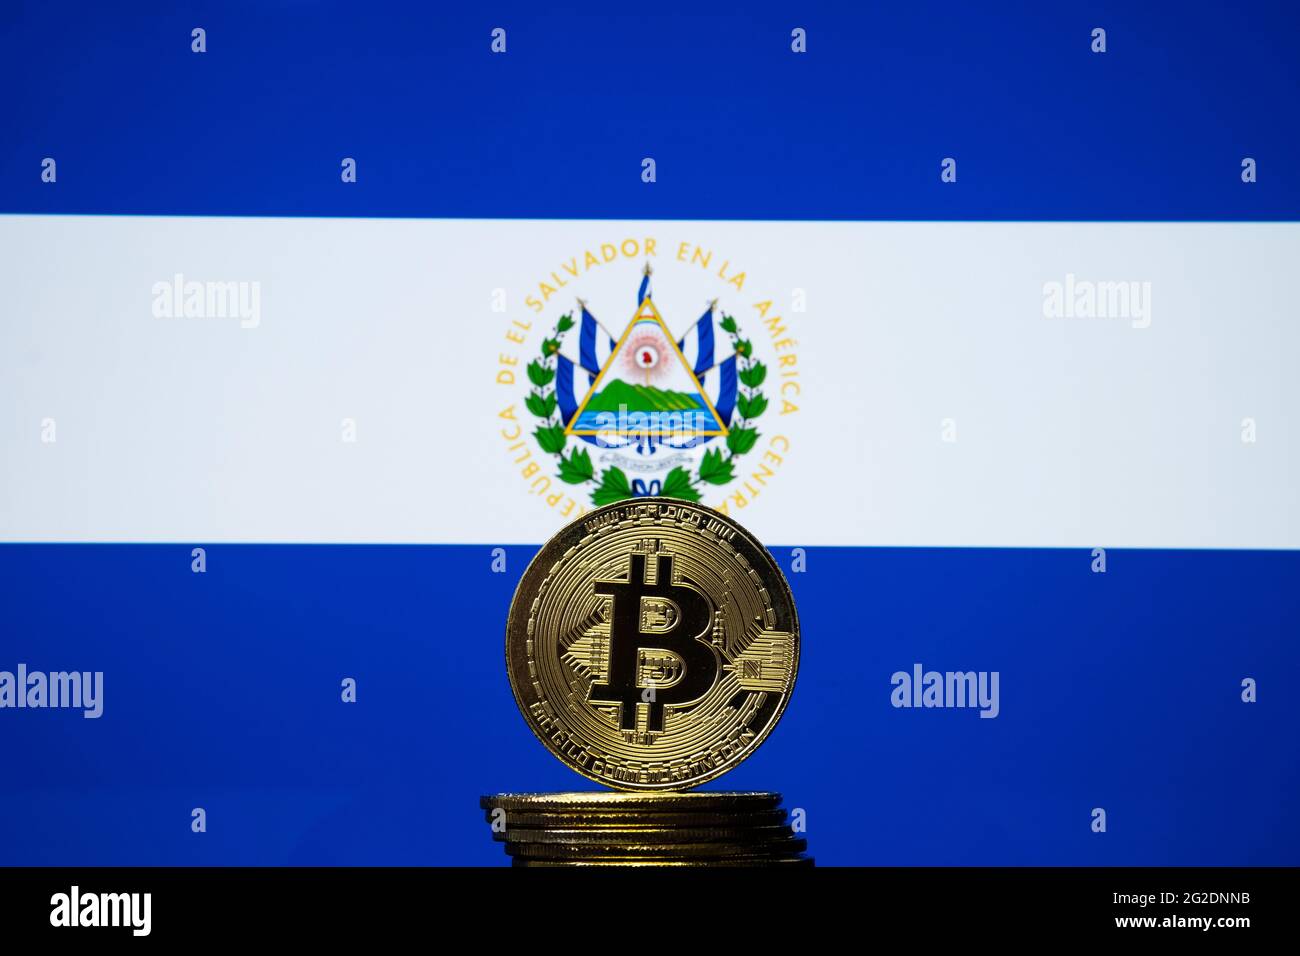 Bitcoin representation coin placed in front of blurred Salvador's national flag. El Salvador is the first country to adopt bitcoin as legal tender. Co Stock Photo